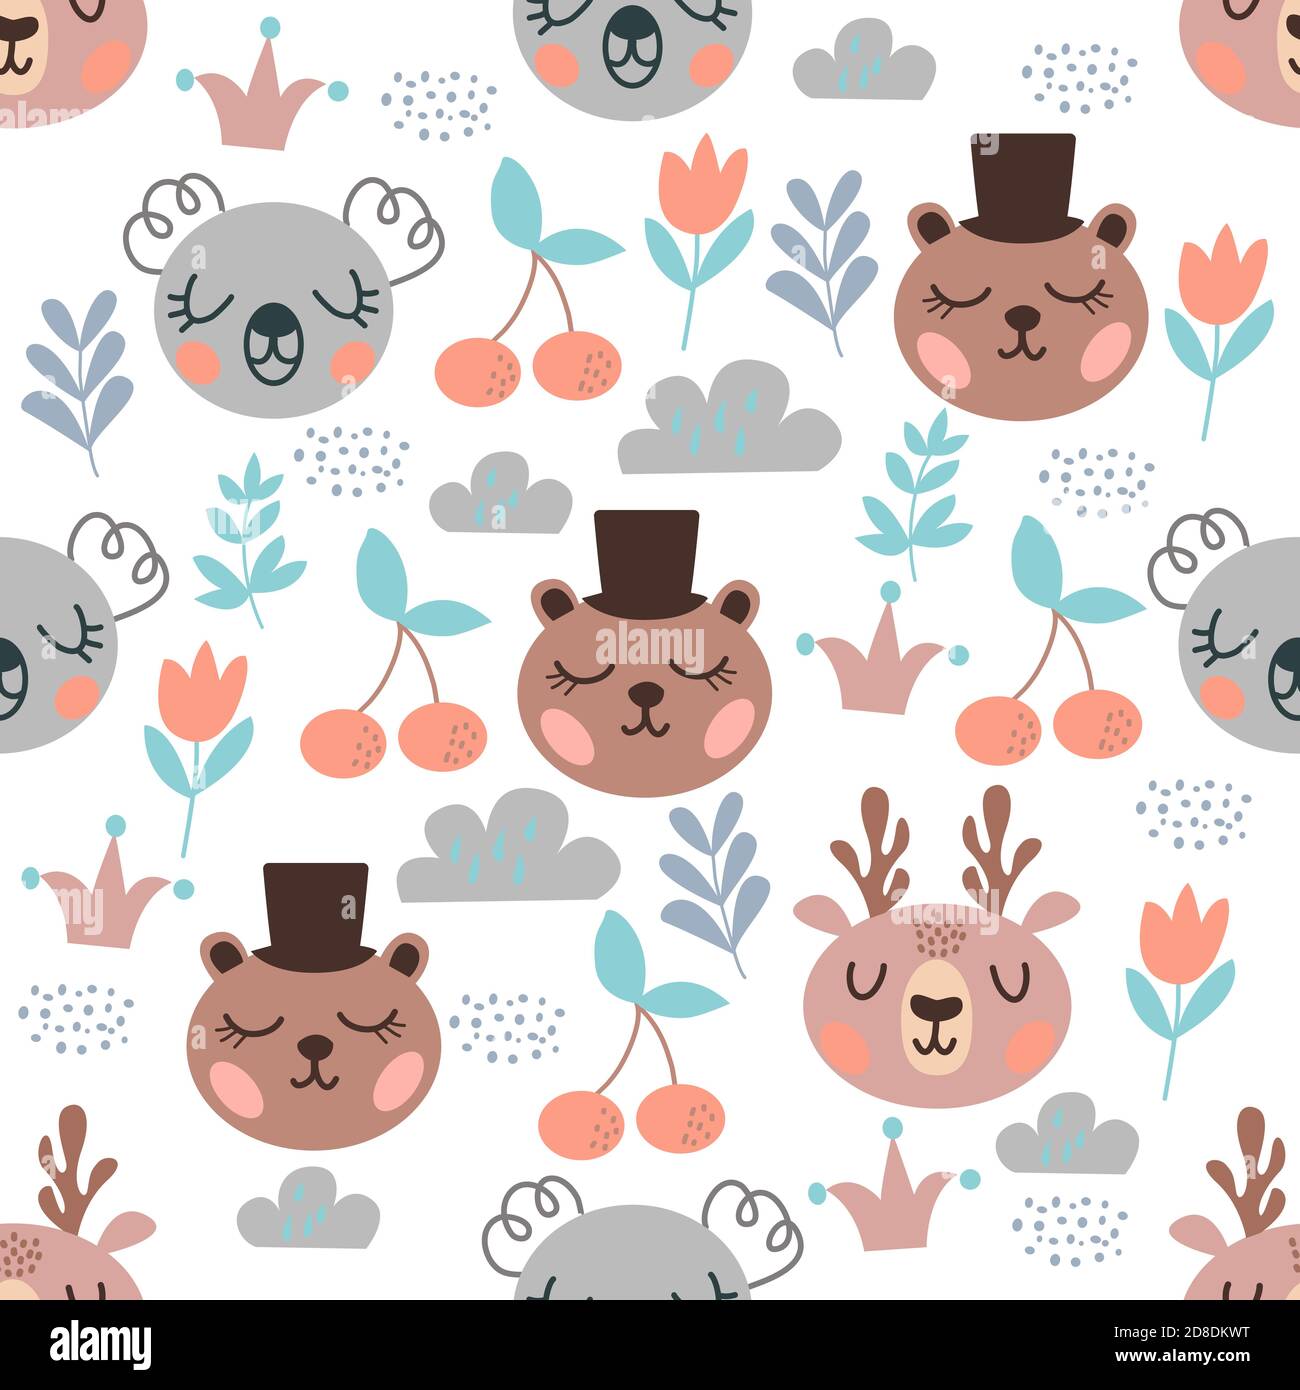 Seamless pattern with cute cartoon faces of bear, panda, deer, leaves, berries and clouds. For decorating covers, prints for children's clothing Stock Vector